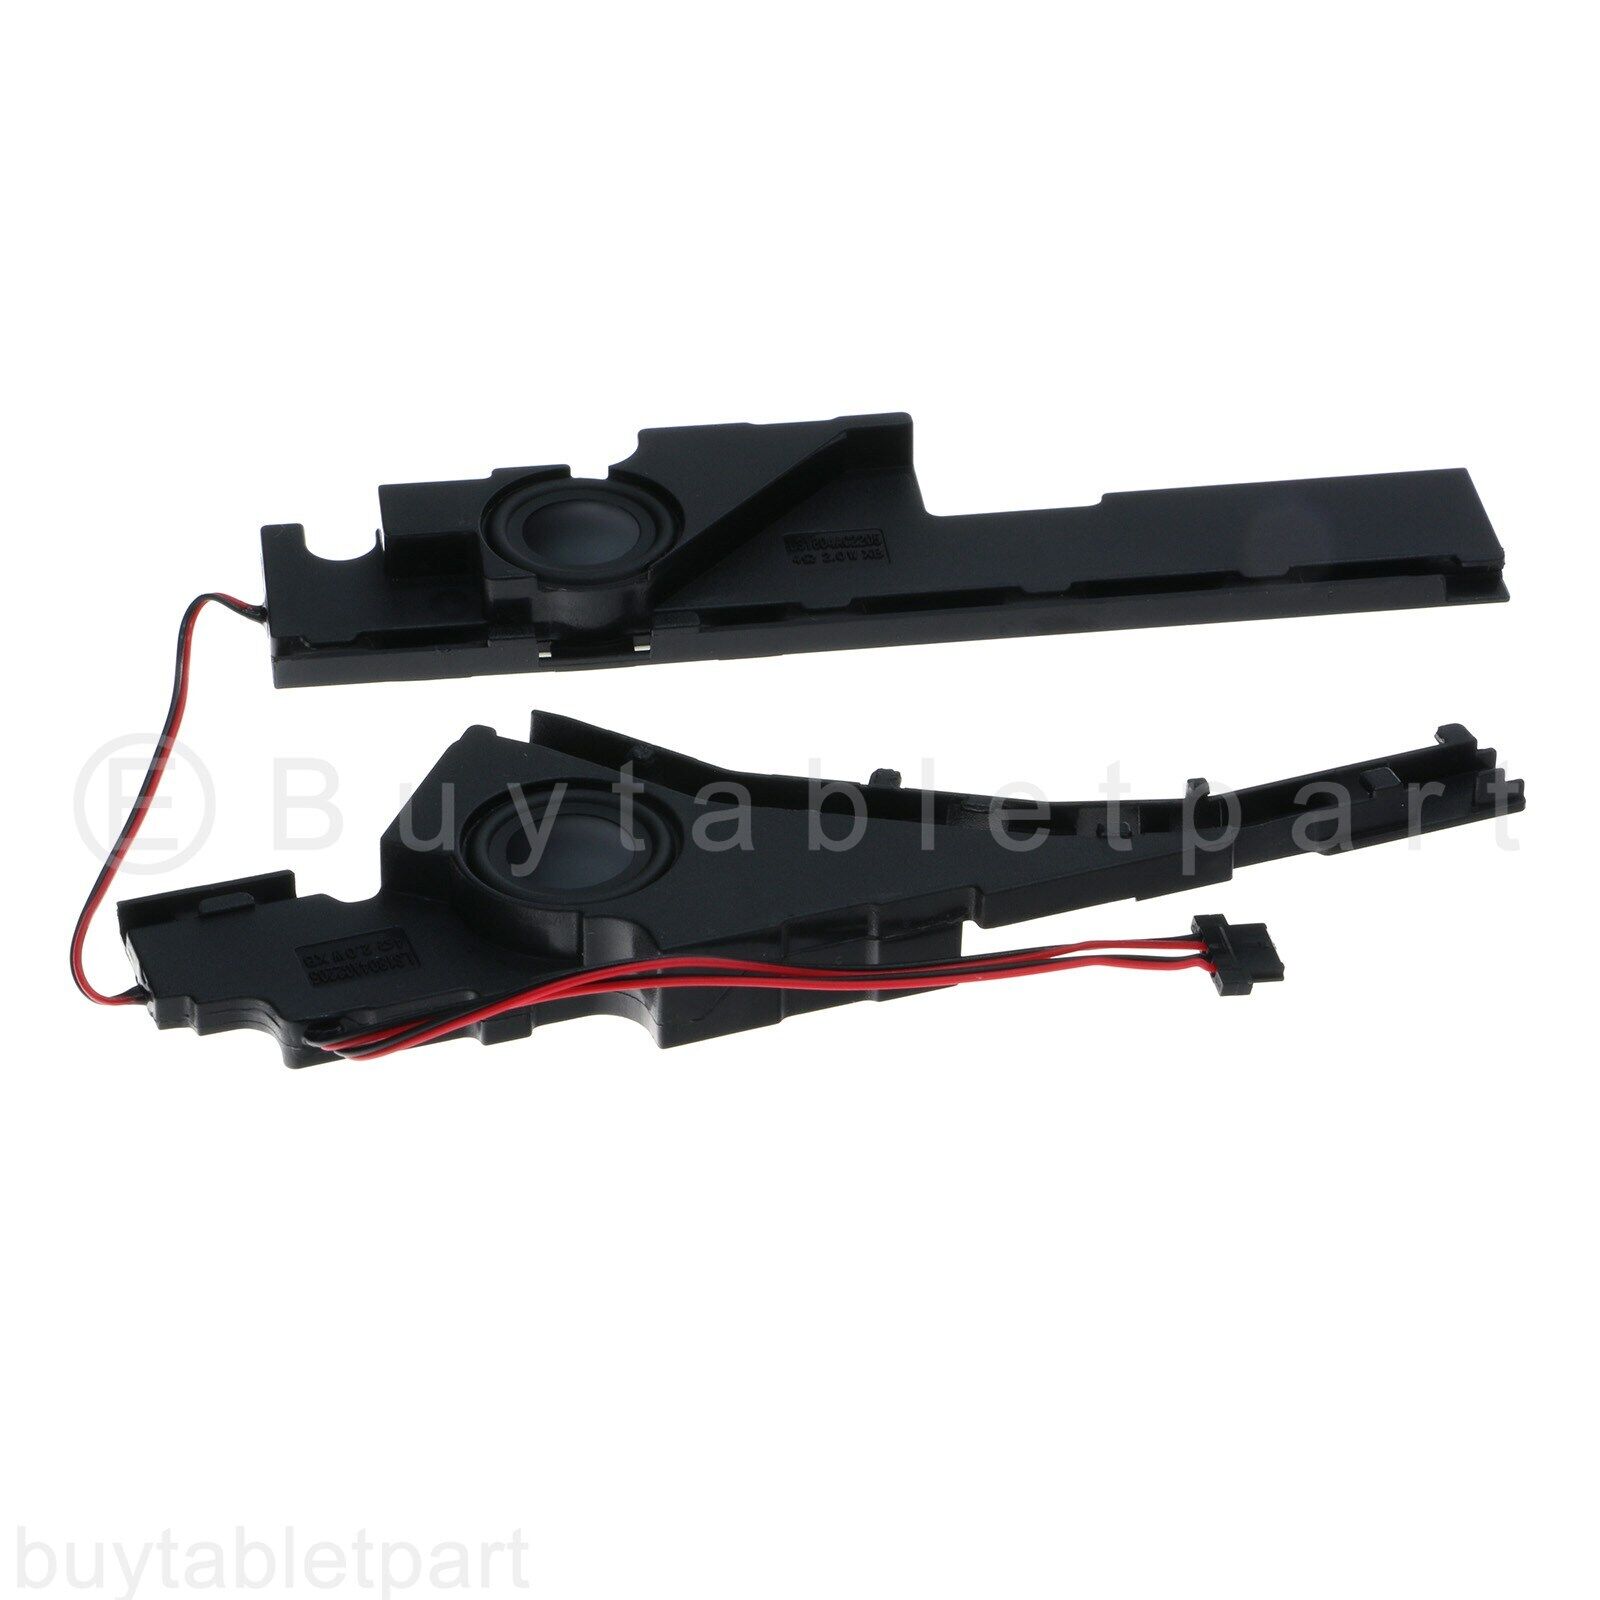 NEW Left+Right Inner Built-in Speaker For ASUS X550VC X550Xi X552E A550 X550L